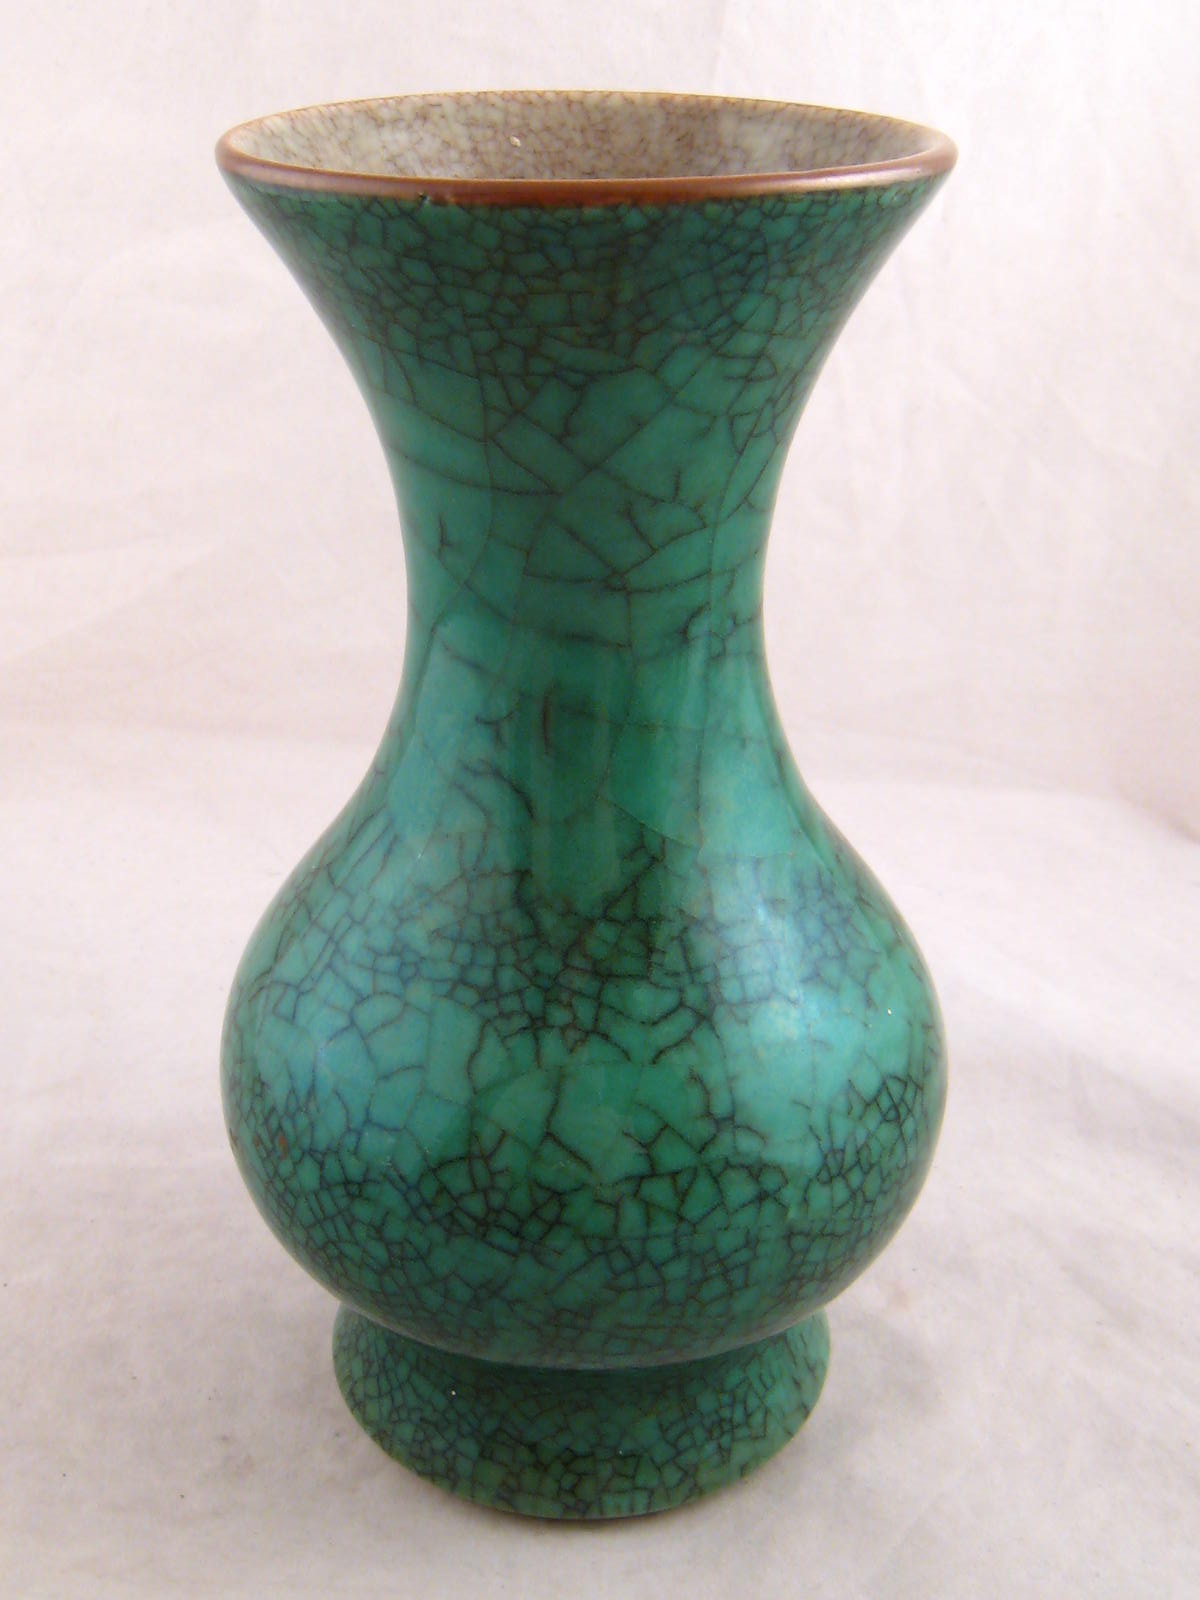 A Chinese green raku glazed ceramic baluster vase with everted rim and raised foot , the interior